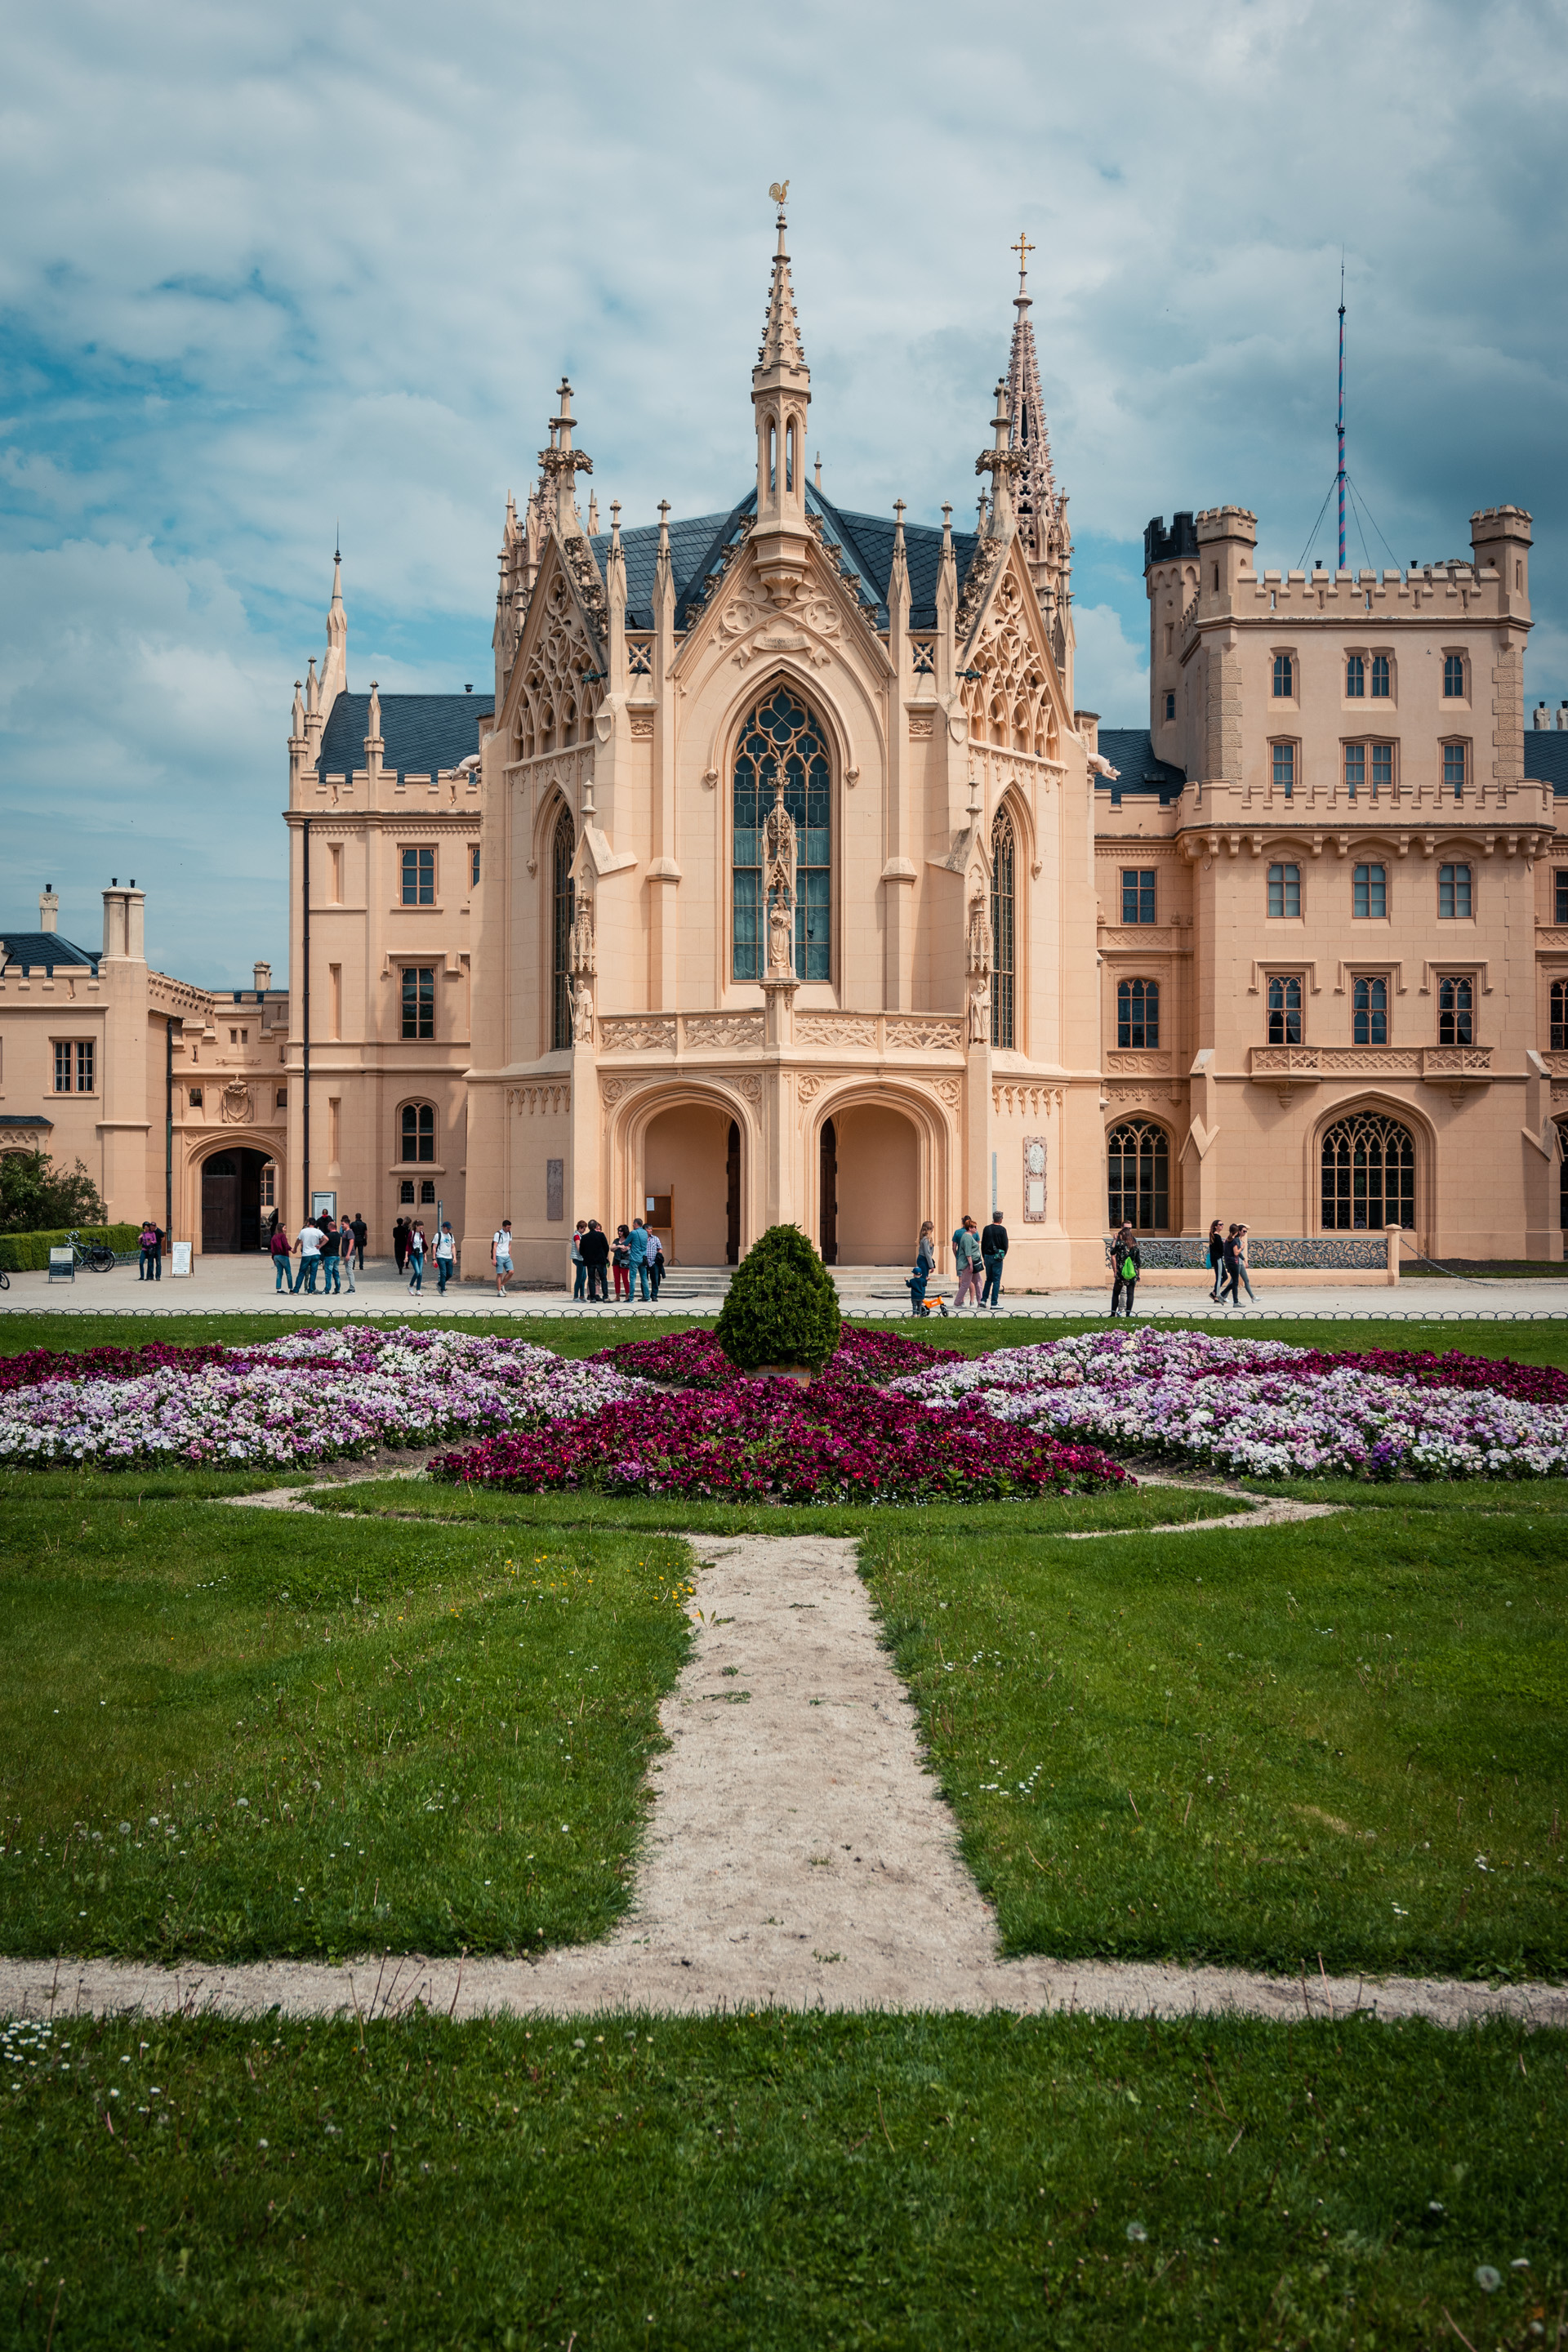 Photo of a flower garden in front of Lednice Castle in Moravia.